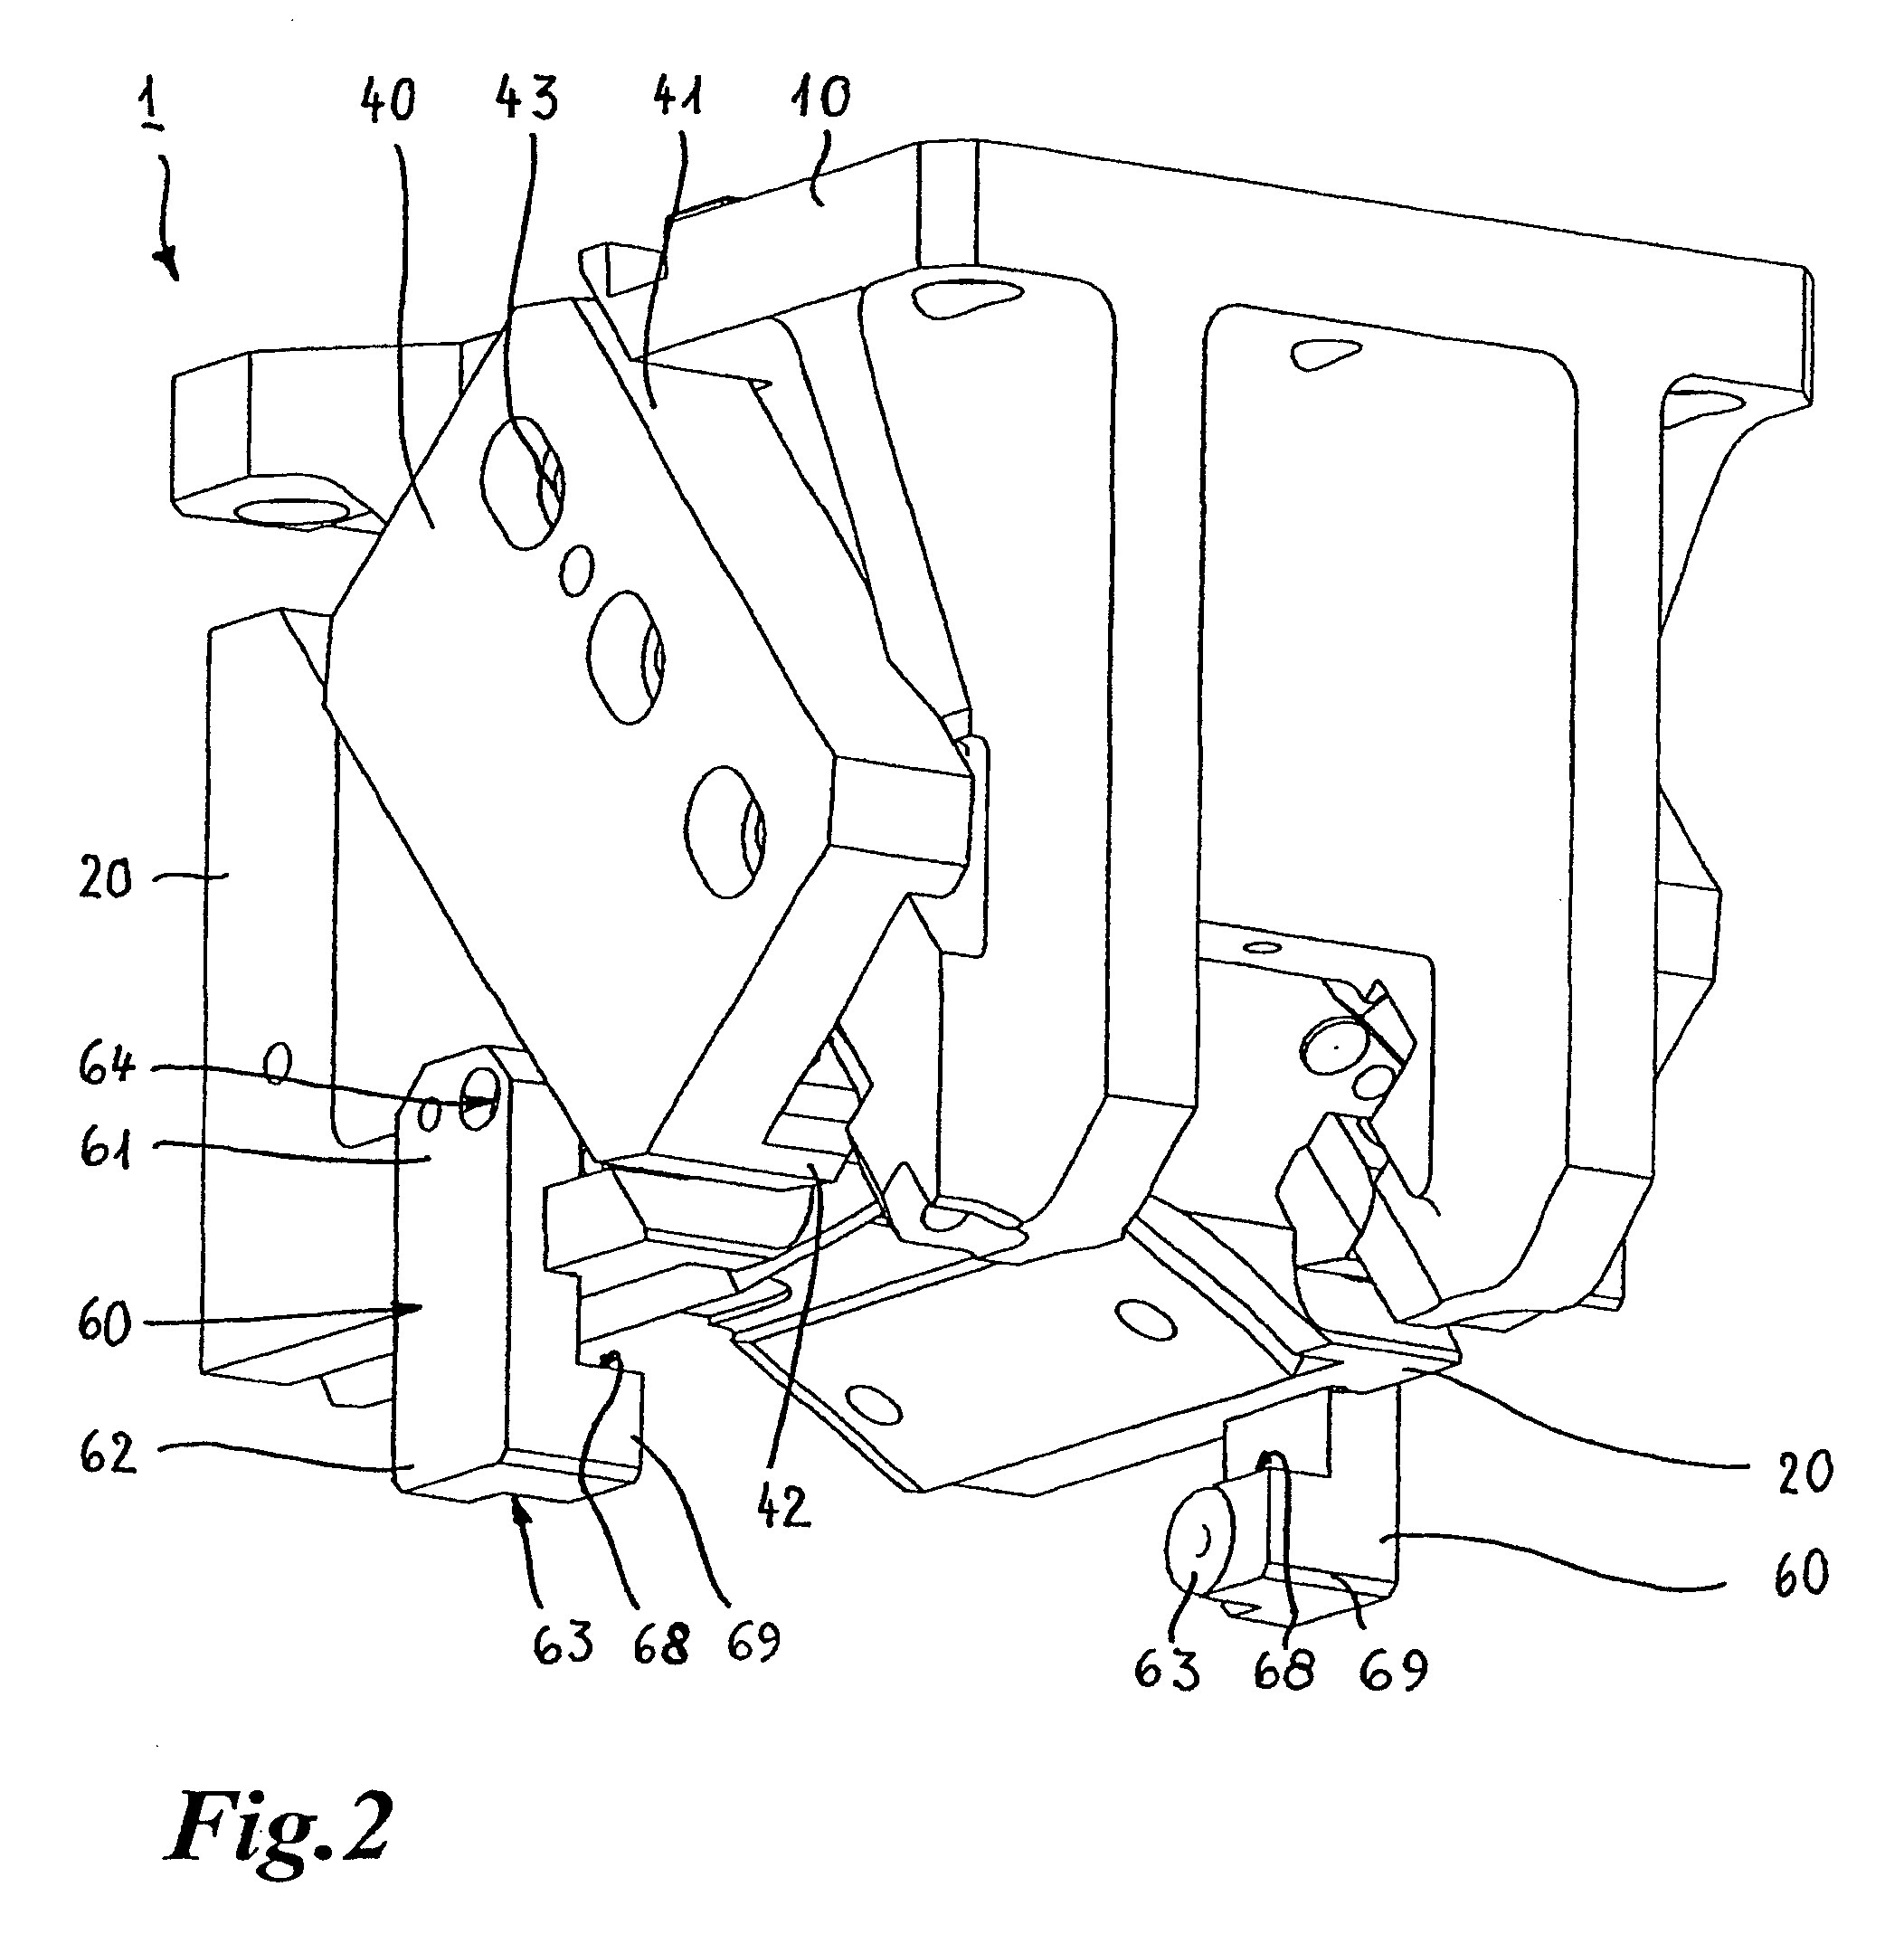 Wedge drive with a force returning device